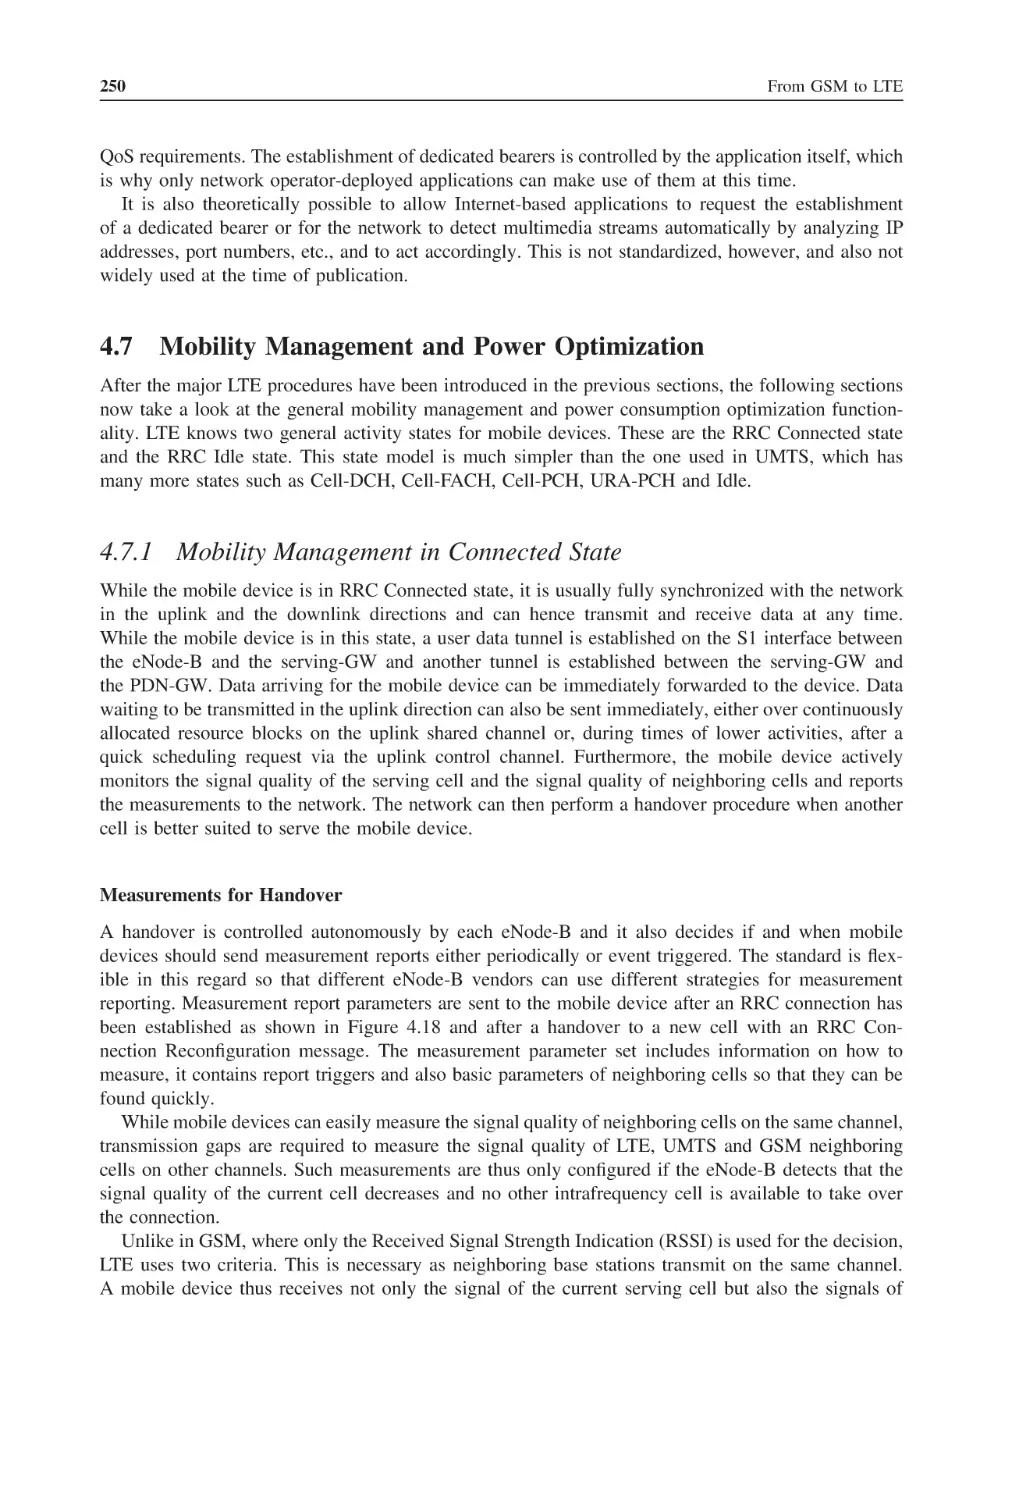 4.7 Mobility Management and Power Optimization
4.7.1 Mobility Management in Connected State